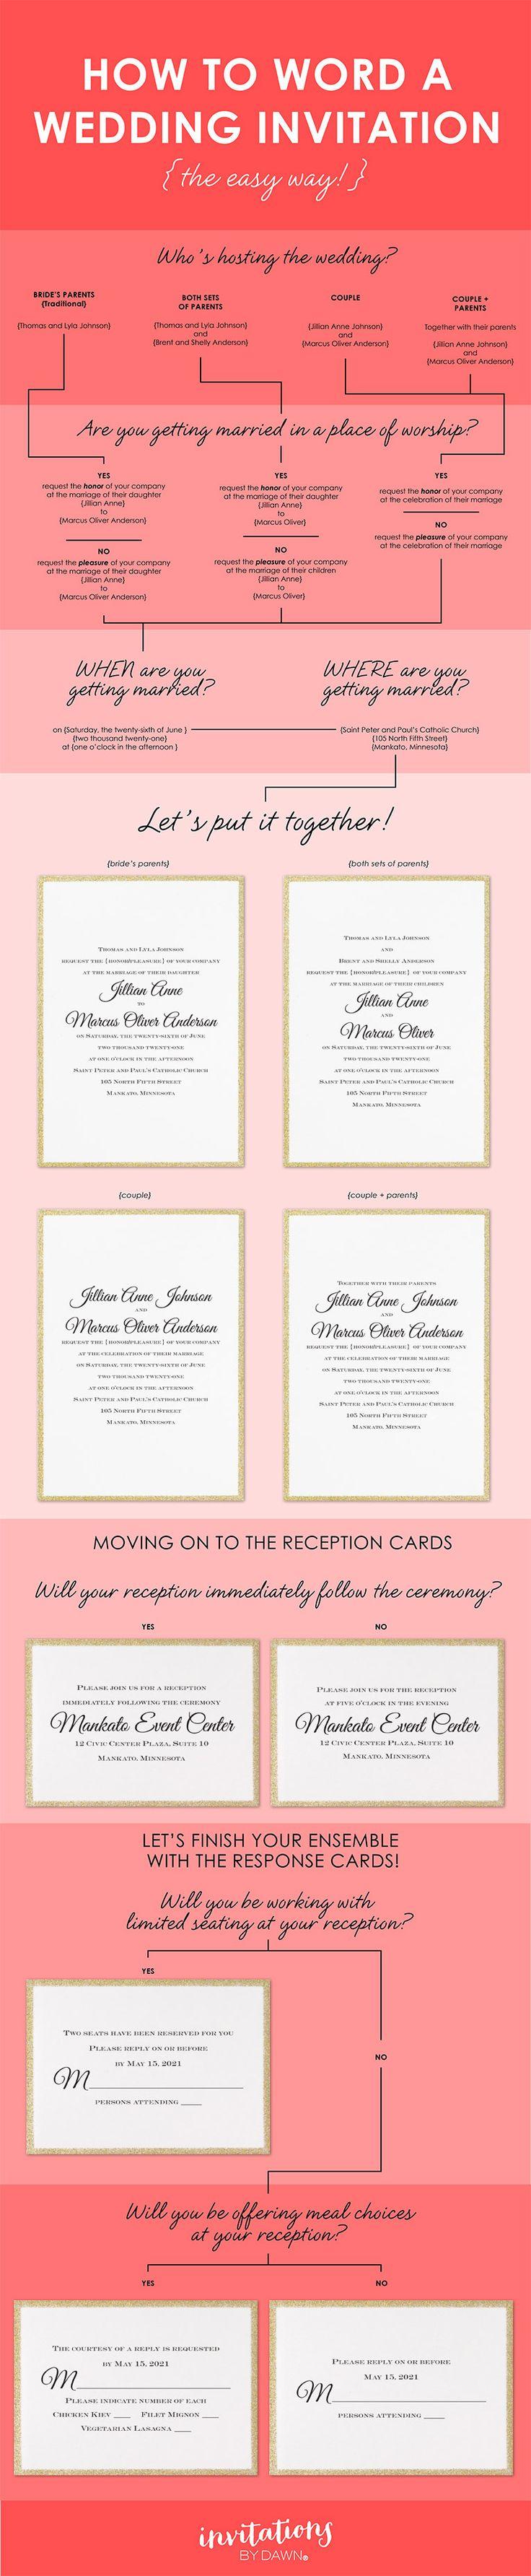 Hochzeit - How To Word Your Wedding Invitations